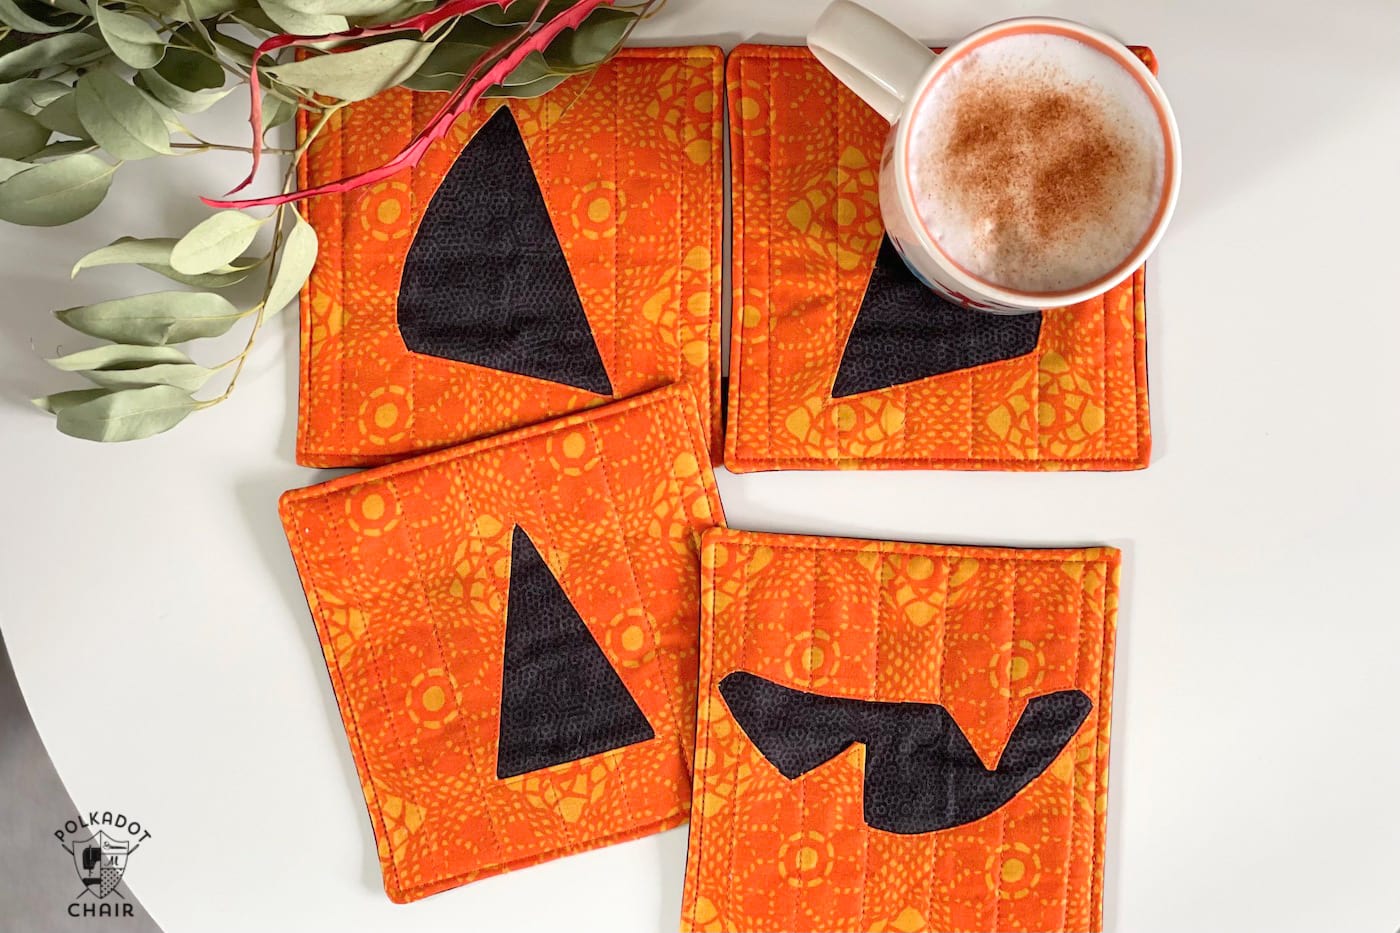 pumpkin face mug rug on white table with coffee cups